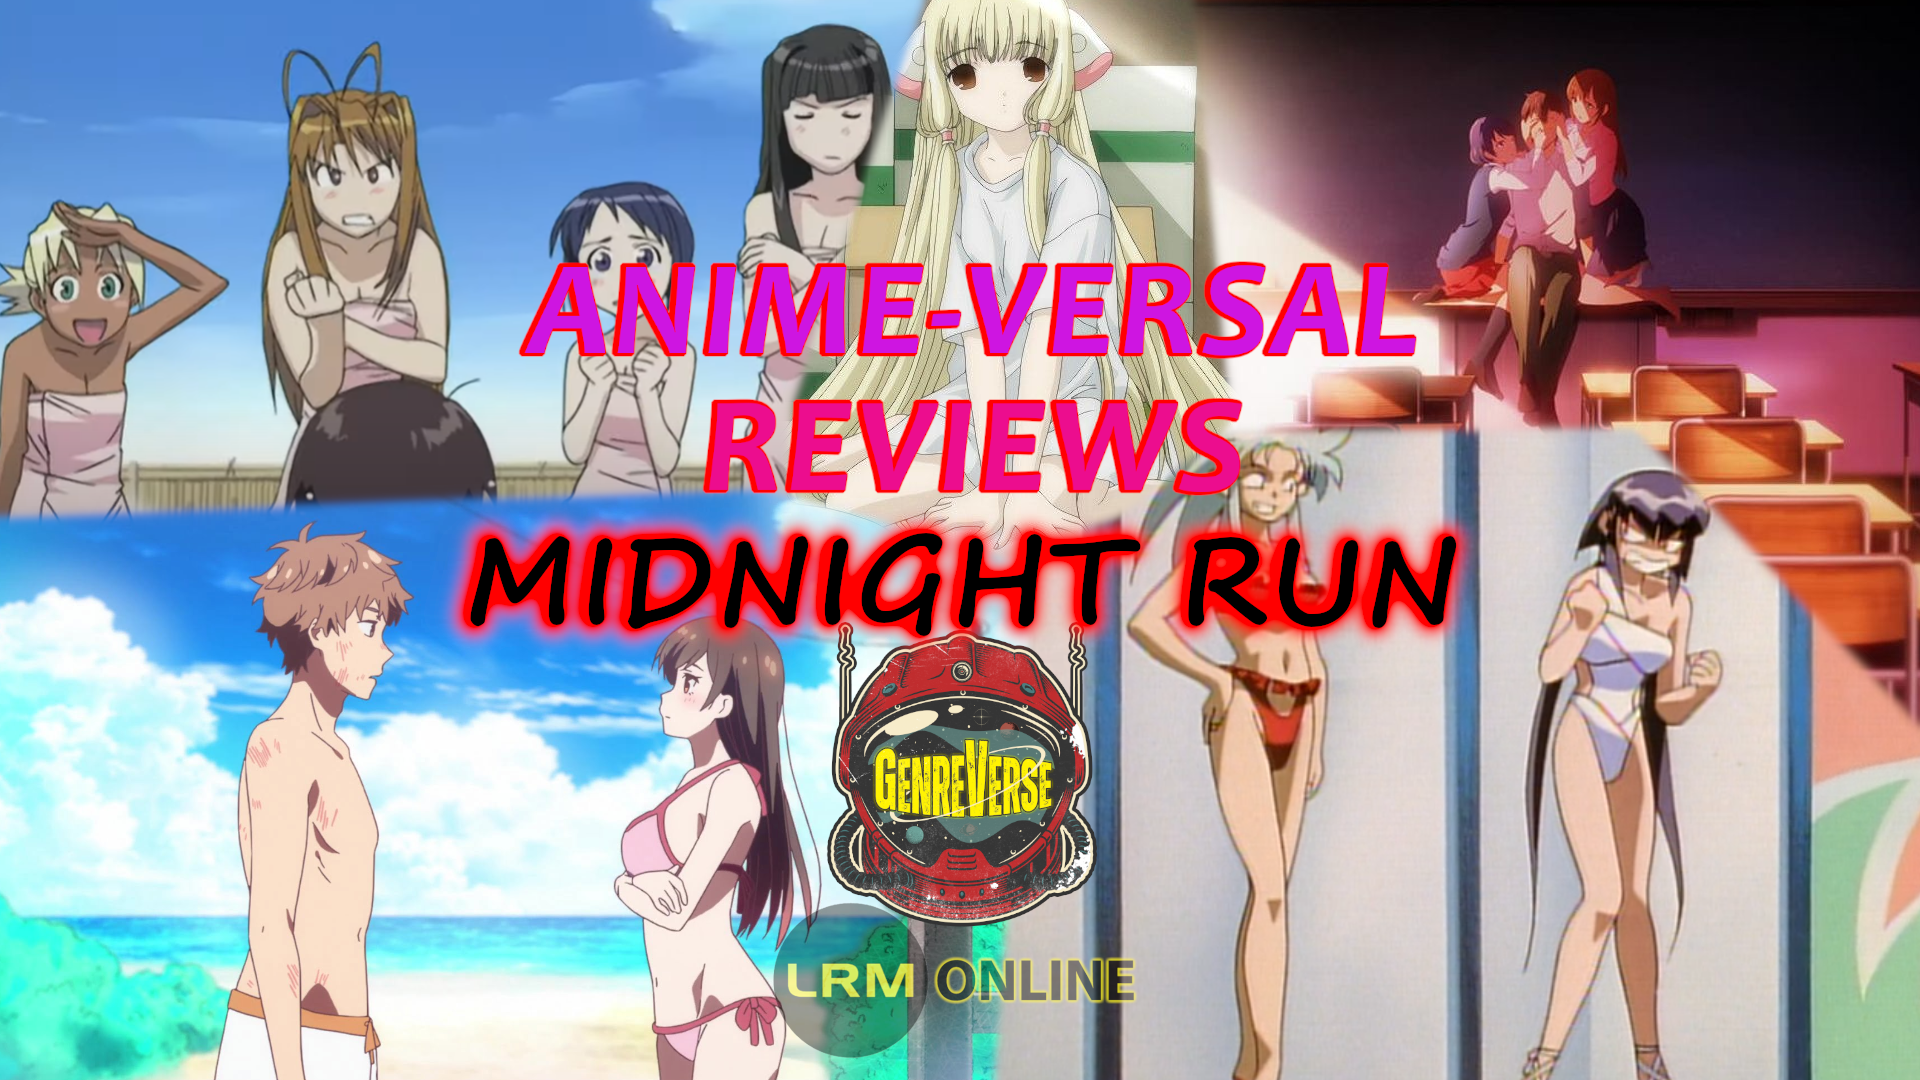 Spicy Anime with Domestic Girlfriend Rent A Girlfriend Tenchi Chobits Love Hina And More Anime versal reviews midnight run AVR midnight run 6-19-21